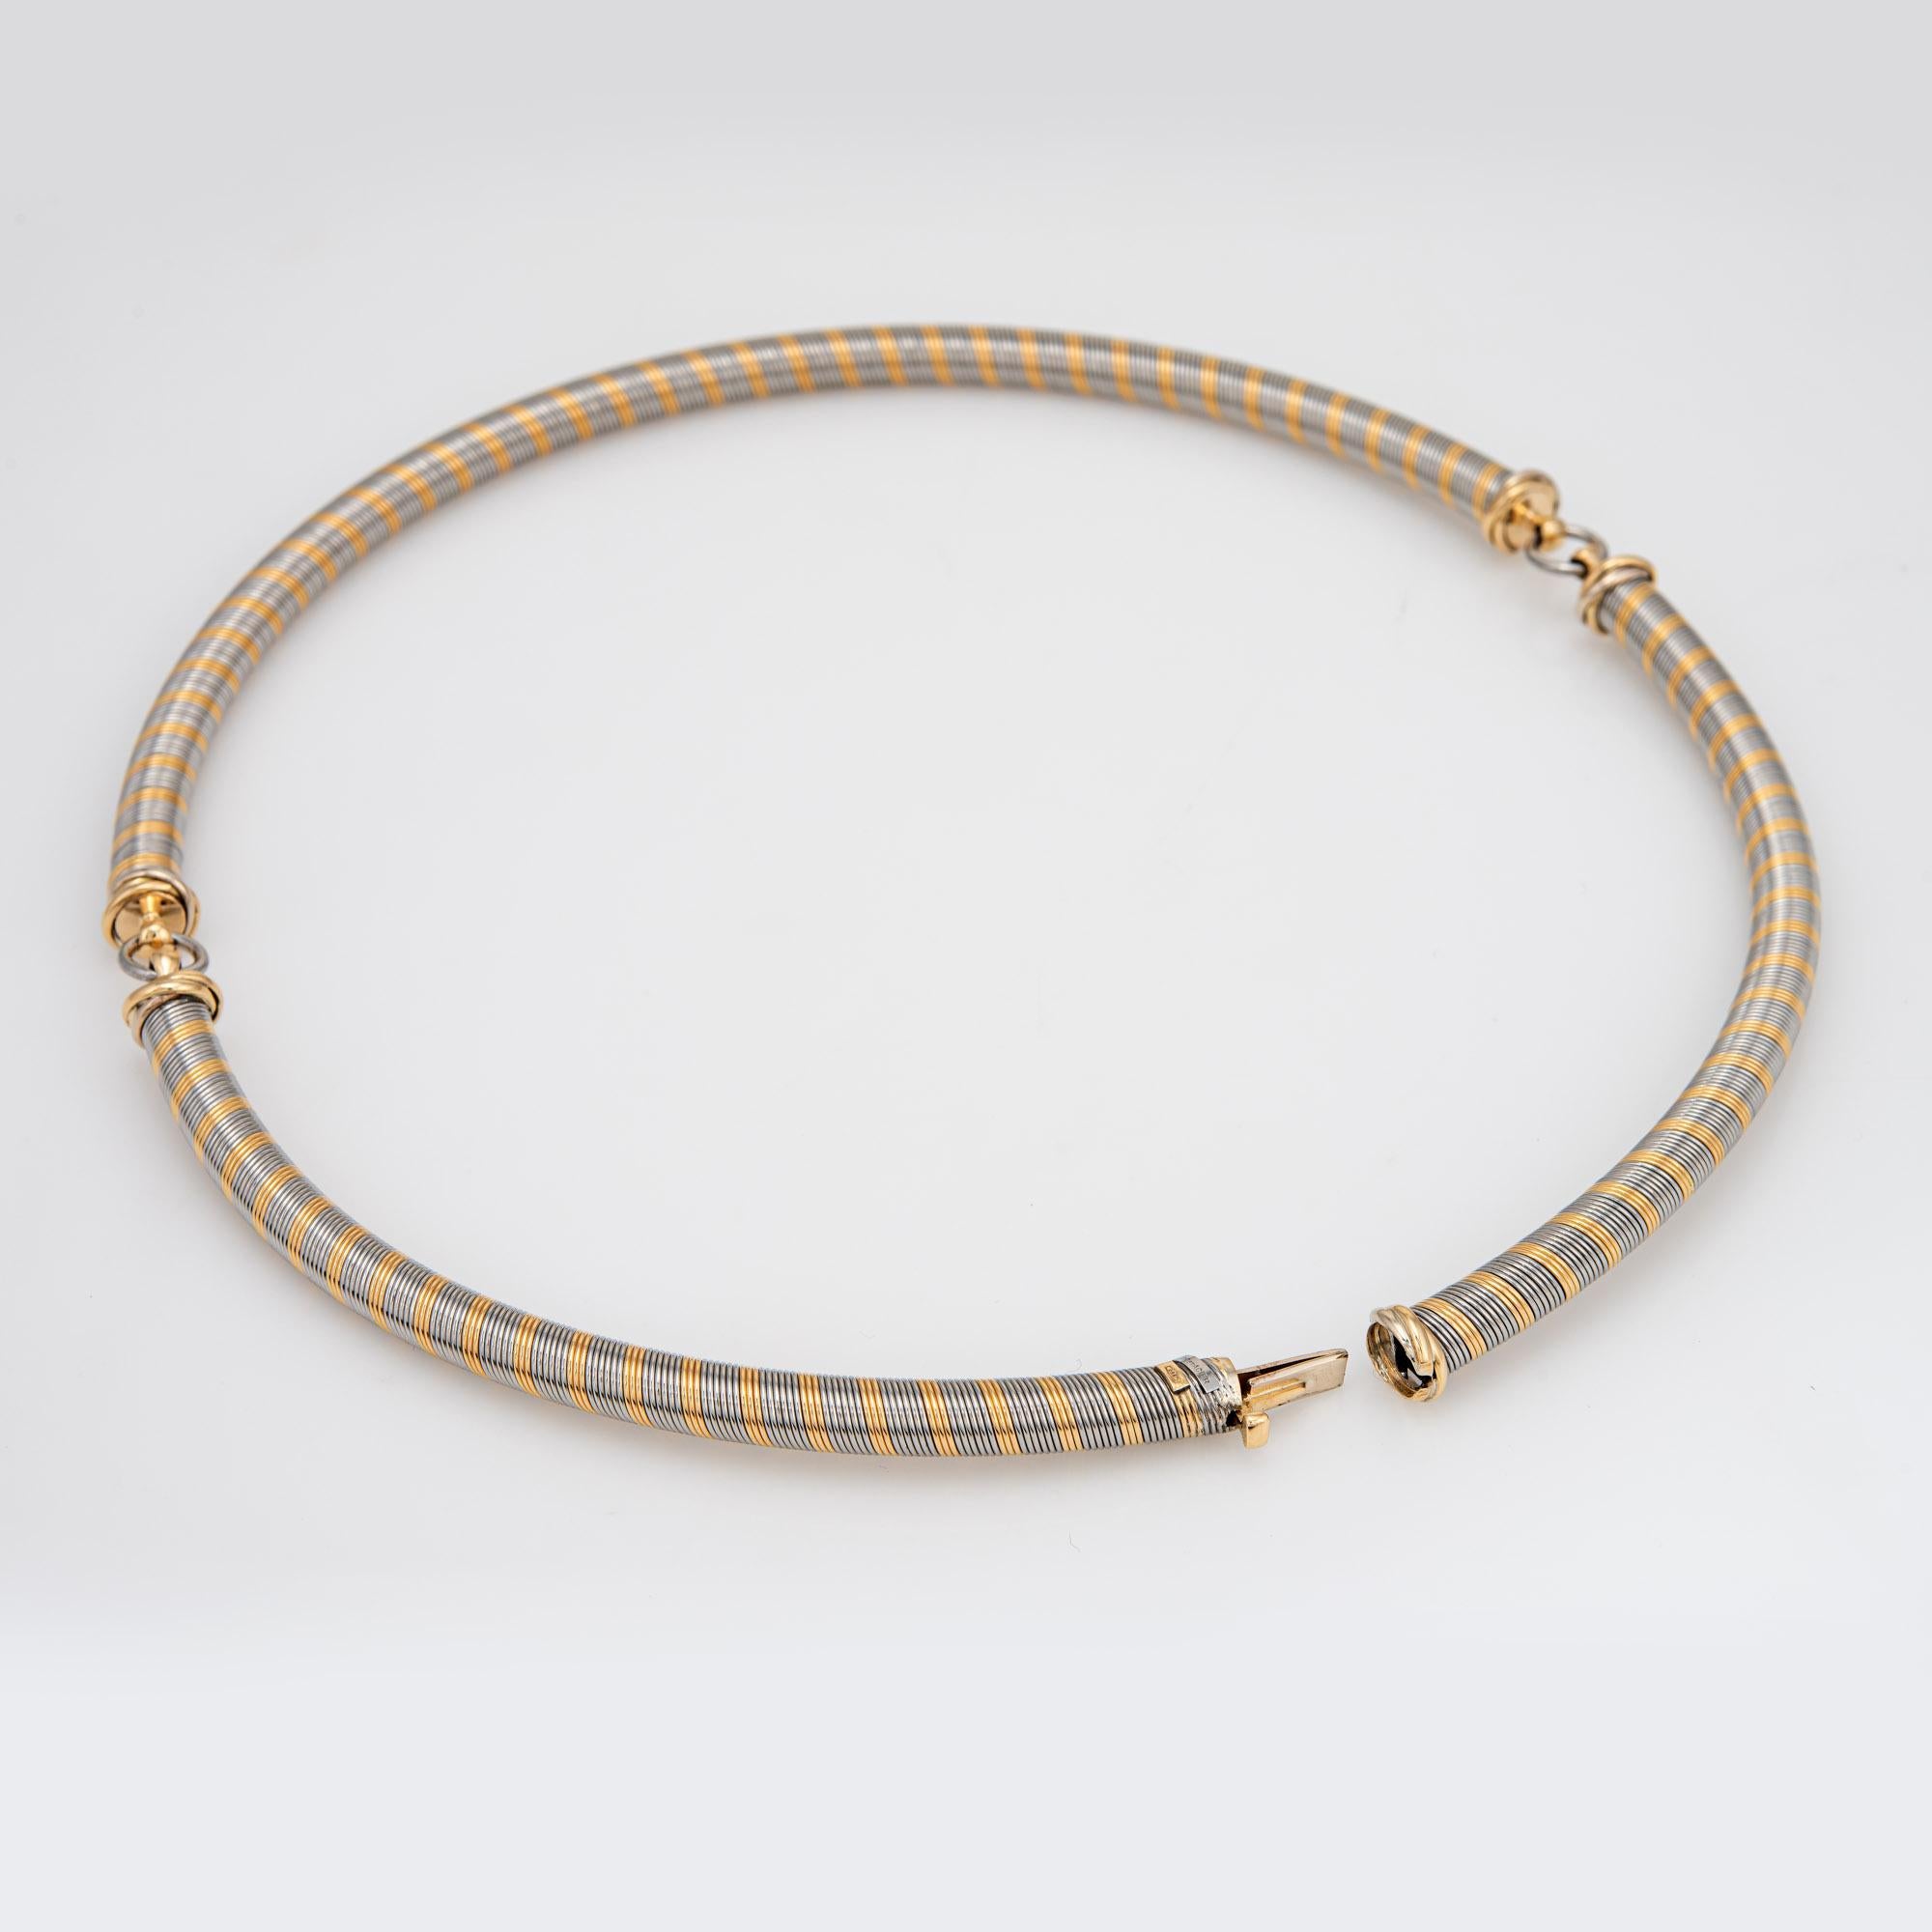 Vintage Cartier stainless steel & 18k yellow gold choker necklace (circa 1980s).  

The choker necklace measures 16 inches in length and is designed to sit at the nape of the neck. Tightly coiled stainless steel and 18k gold is smooth to the touch